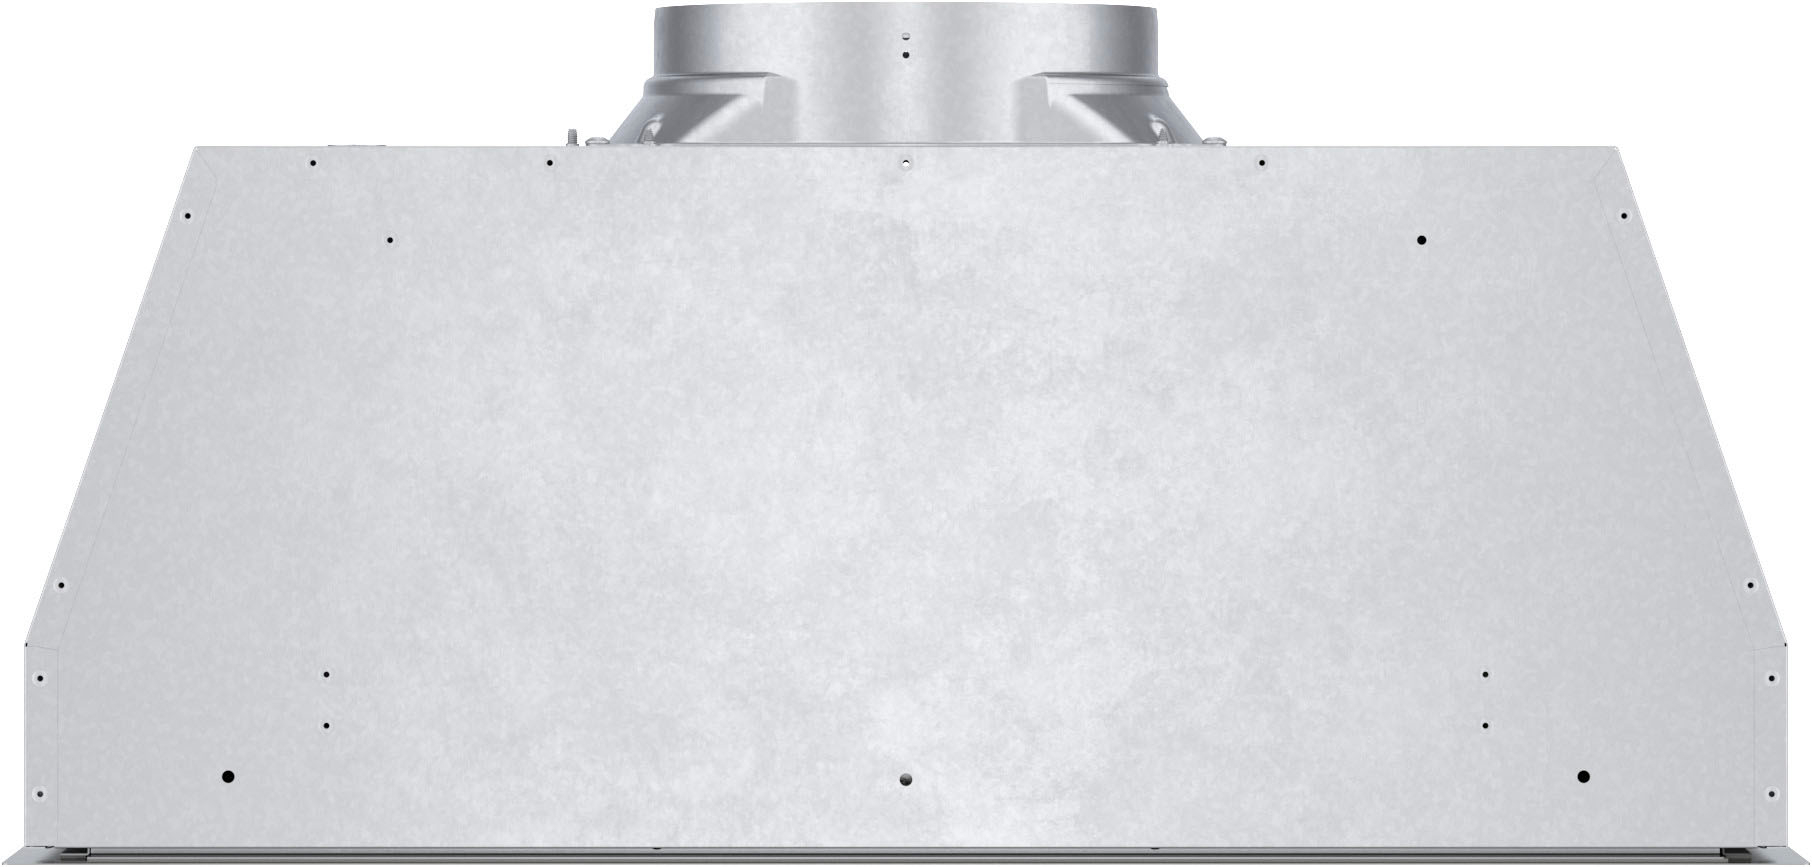 Thermador® Masterpiece® 30 Stainless Steel Under Cabinet Range Hood, Yale  Appliance